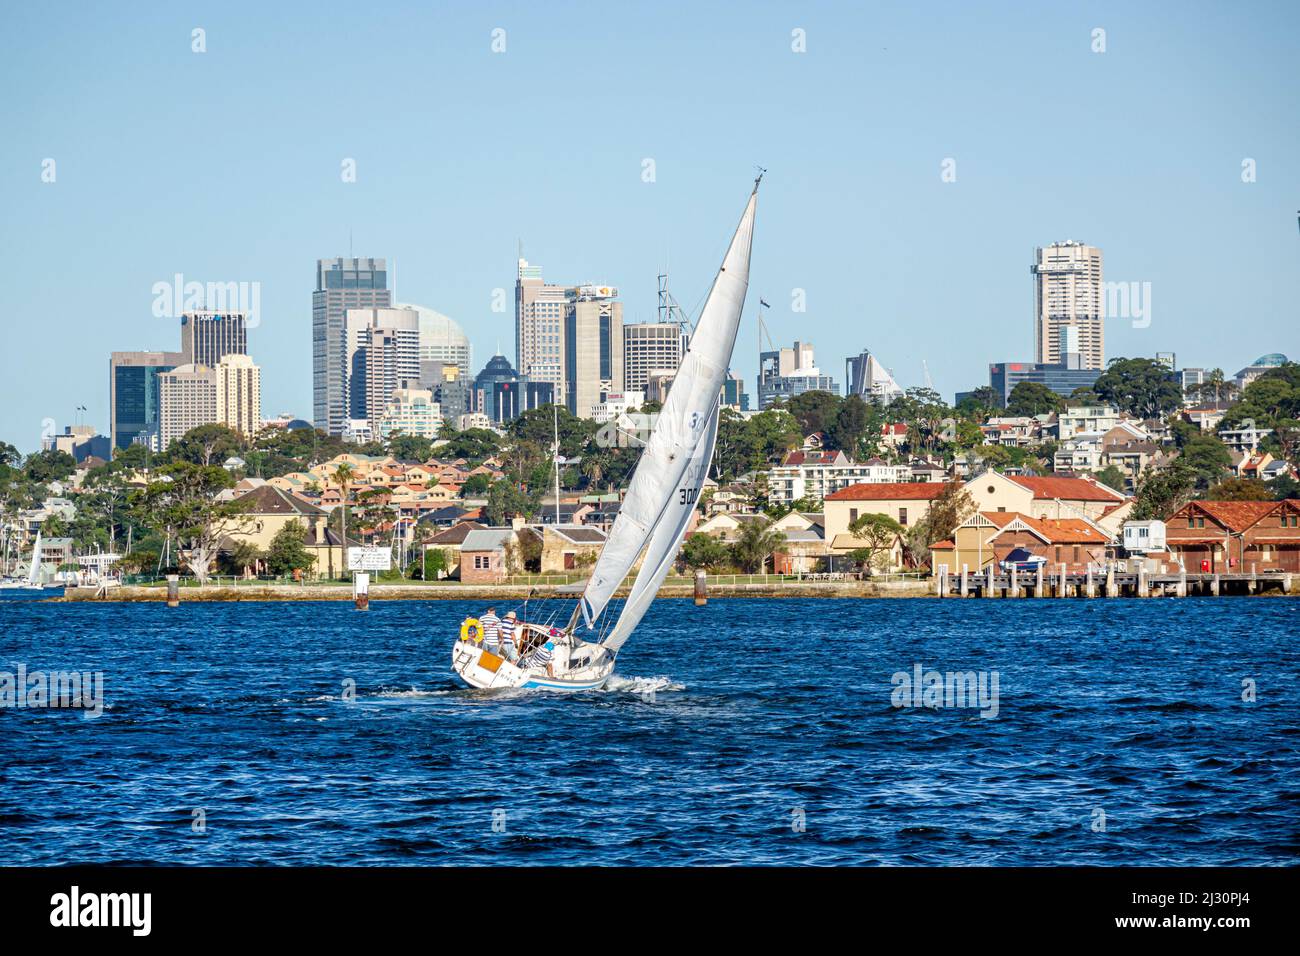 Sydney Australia,New South Wales,Harbour,harbor,water,waterfront,homes,houses,Drummoyne Central Business District,skyscrapers,city skyline sailboat Stock Photo